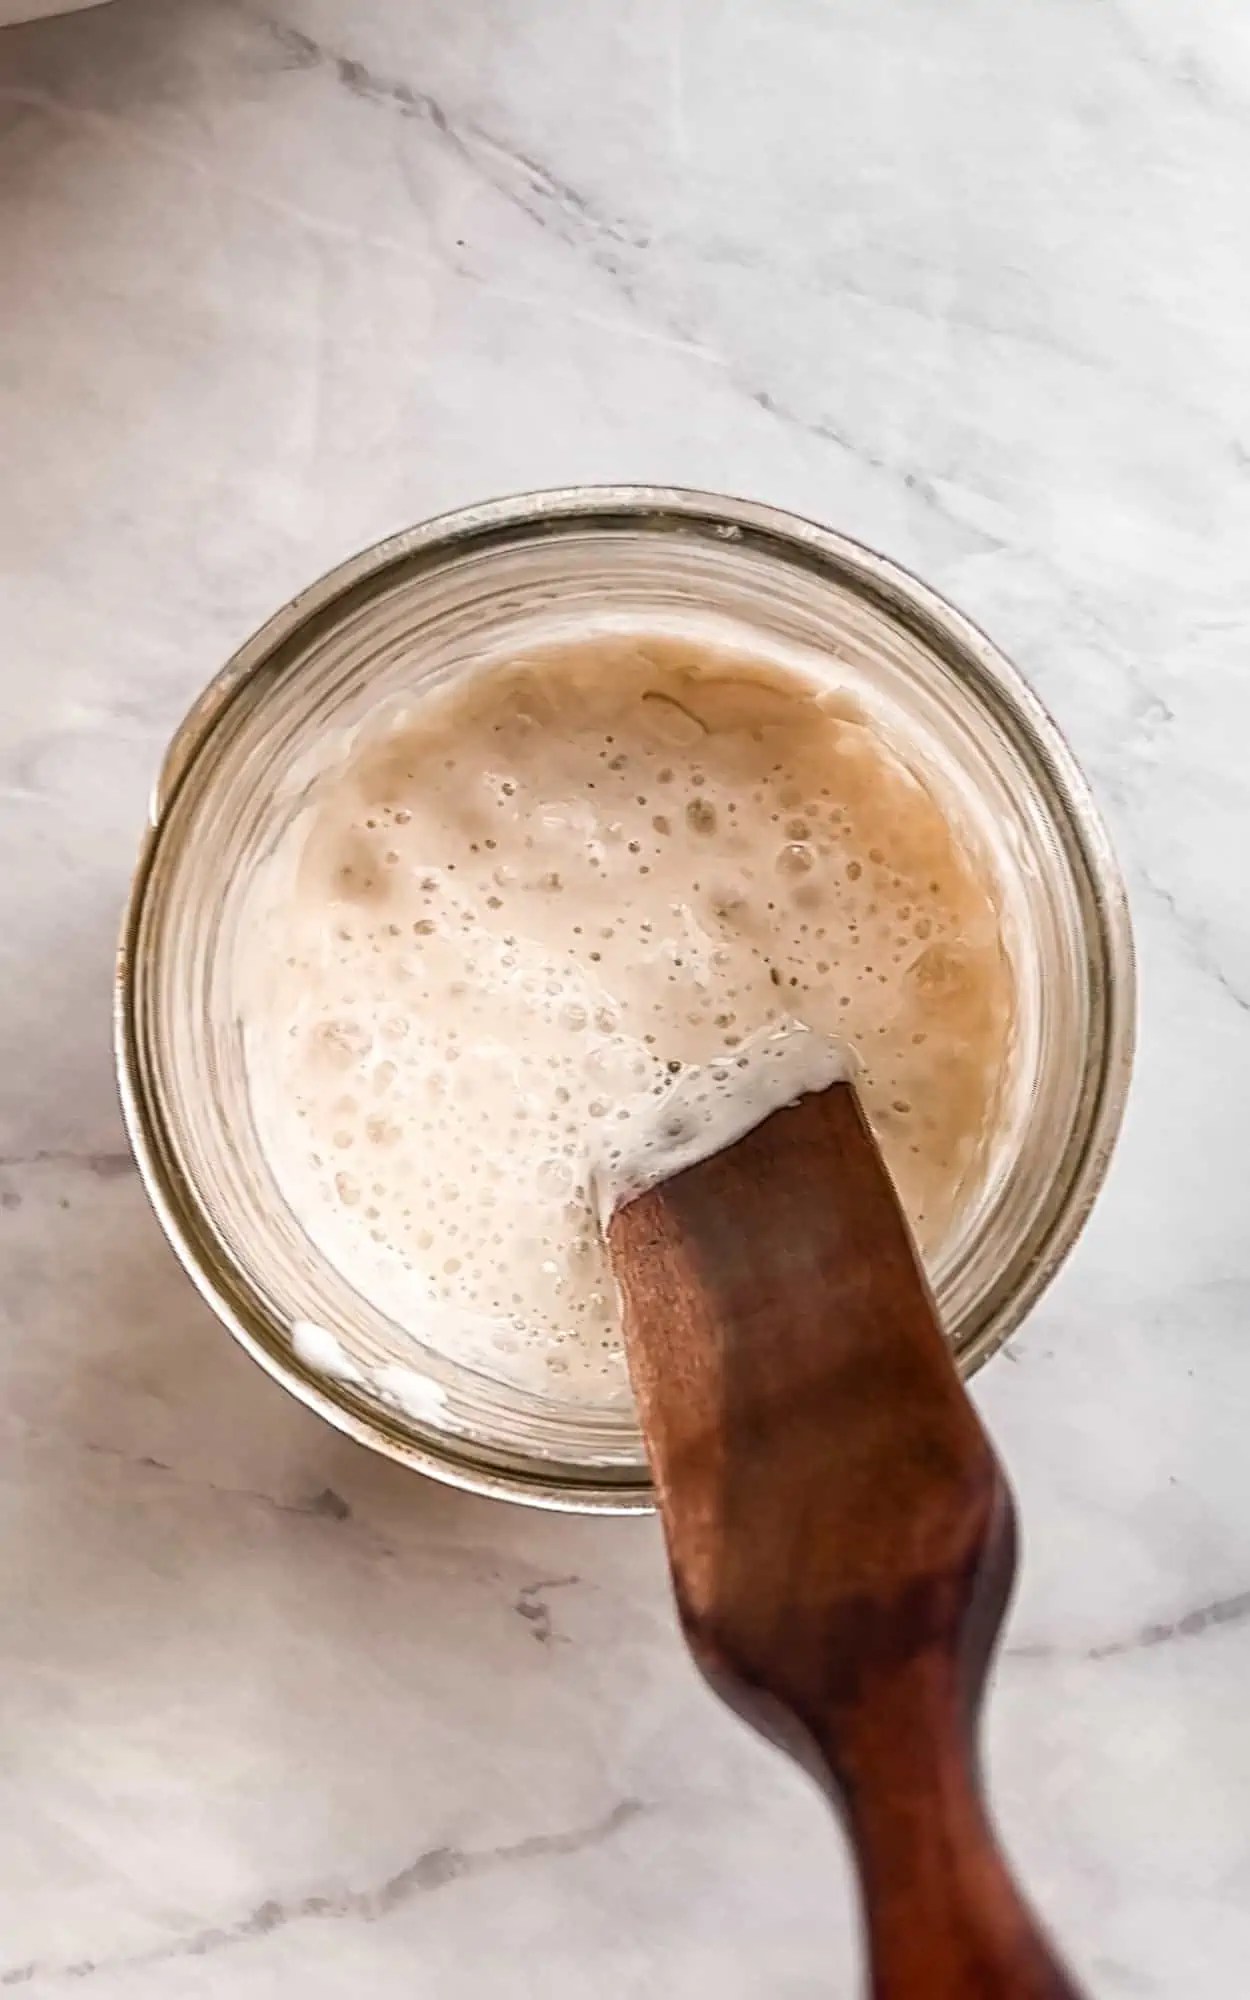 bubbly sourdough starter in a glass mason jar with a wooden spatula